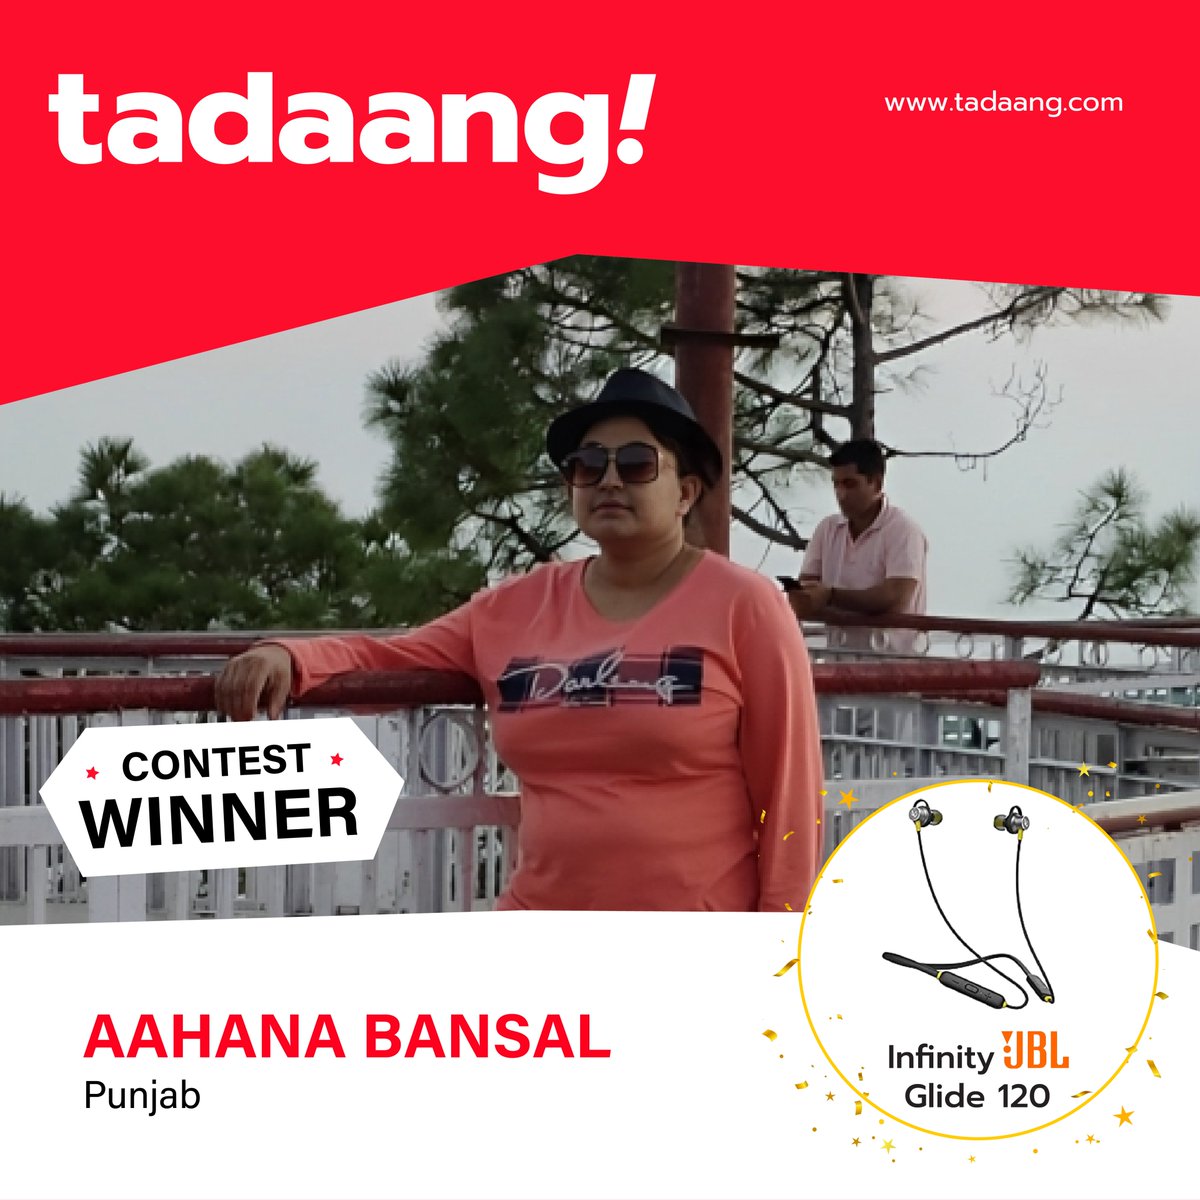 Congratulations to Aahana Bansal from Punjab, who is our weekly contest winner. She wins a neckband from Infinity - Glide 120. You can also play on Tadaang and win special prizes at tadaang.com/contest

#tadaang #winwithtadaang #contest #tadaangcontests #JBL #infinityglide120